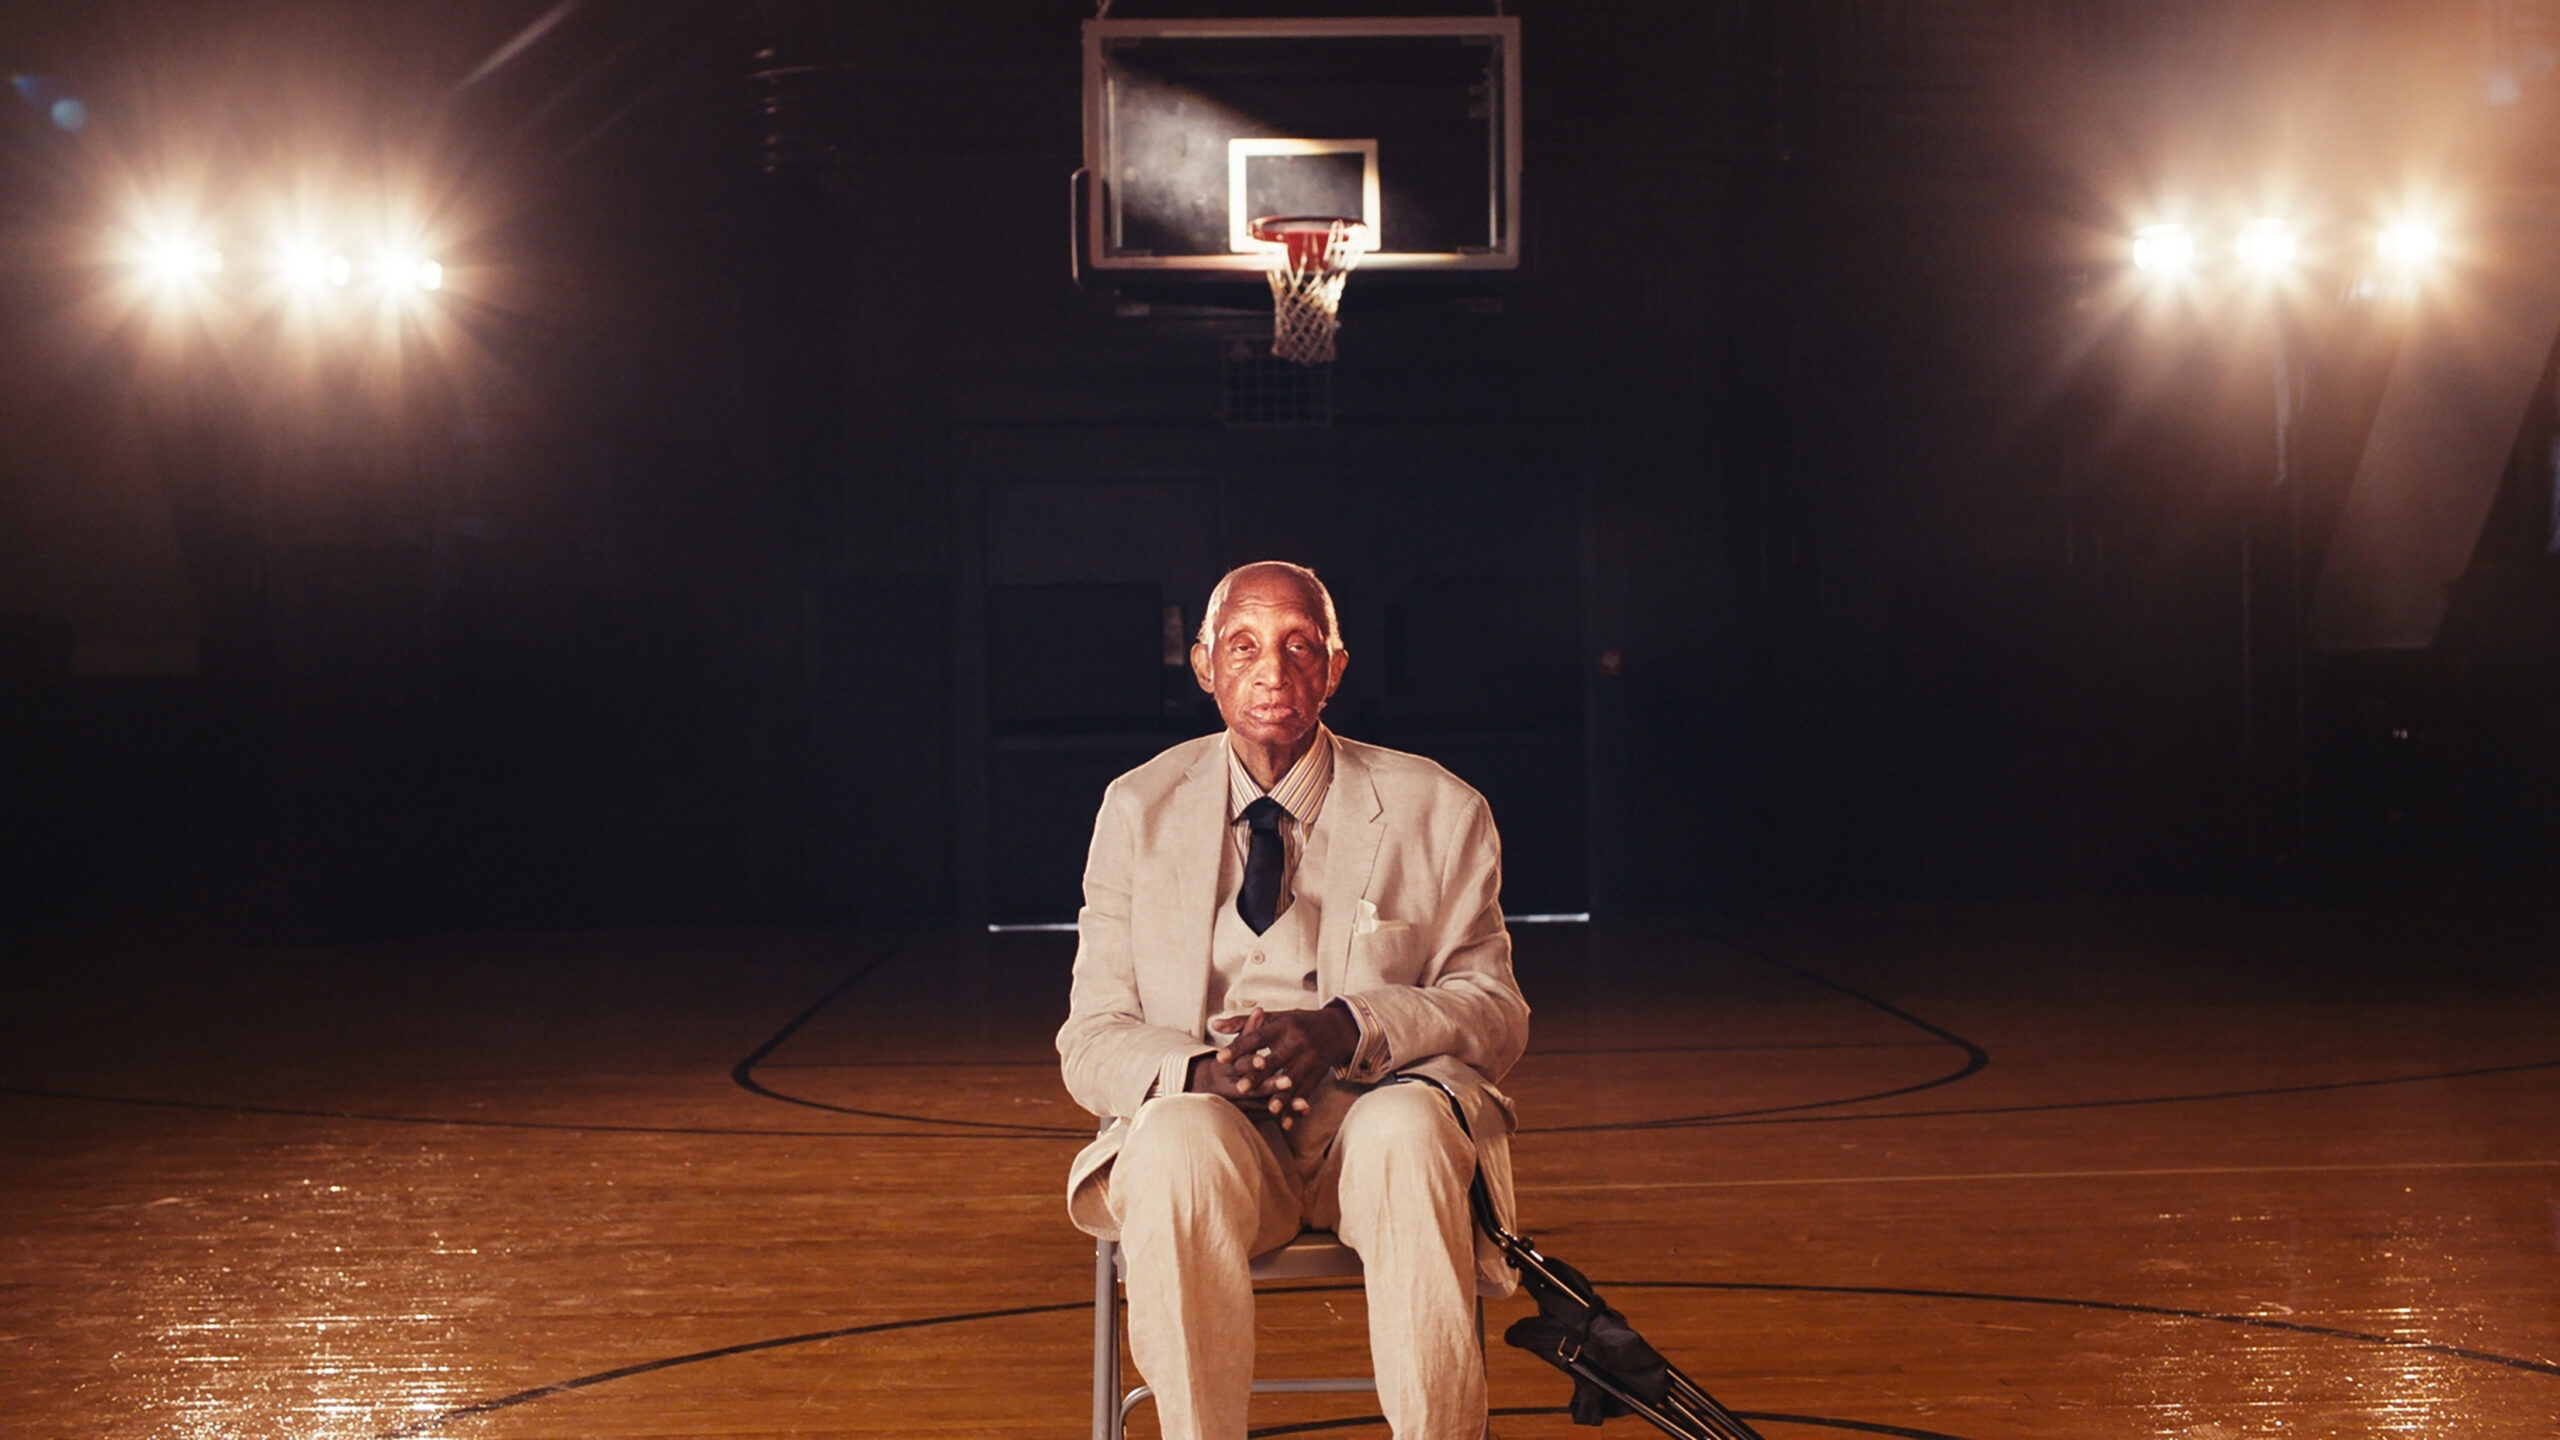 An older Black man in a tan suit and brown tied sits on chair on a empty basketball court